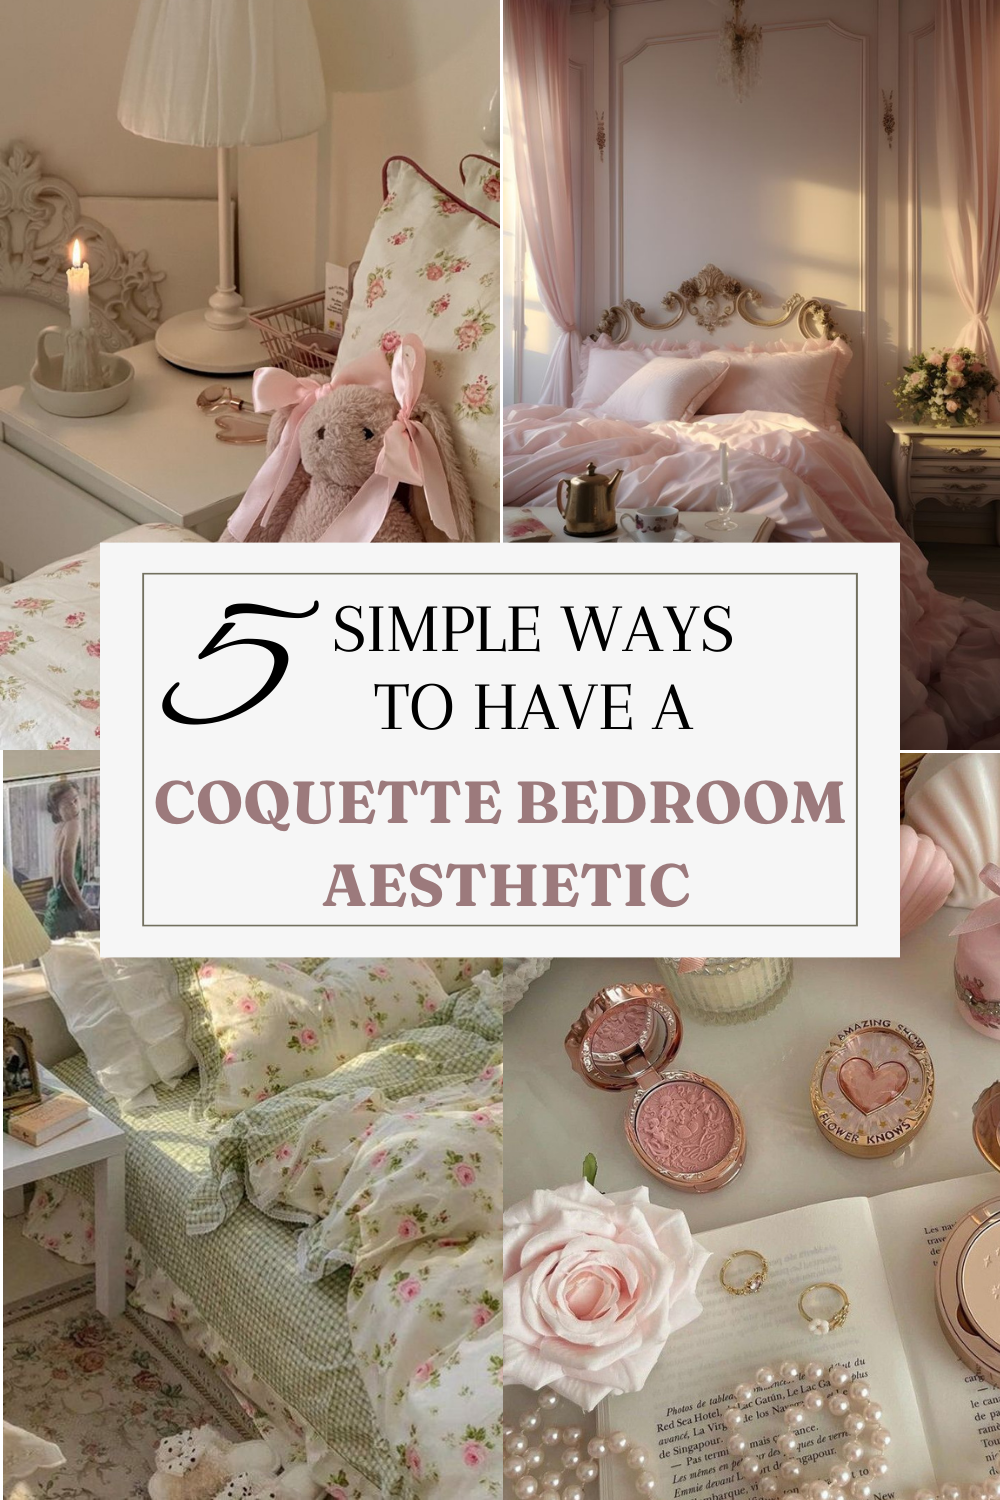 5 Simple Ways to have a Coquette Bedroom Aesthetic